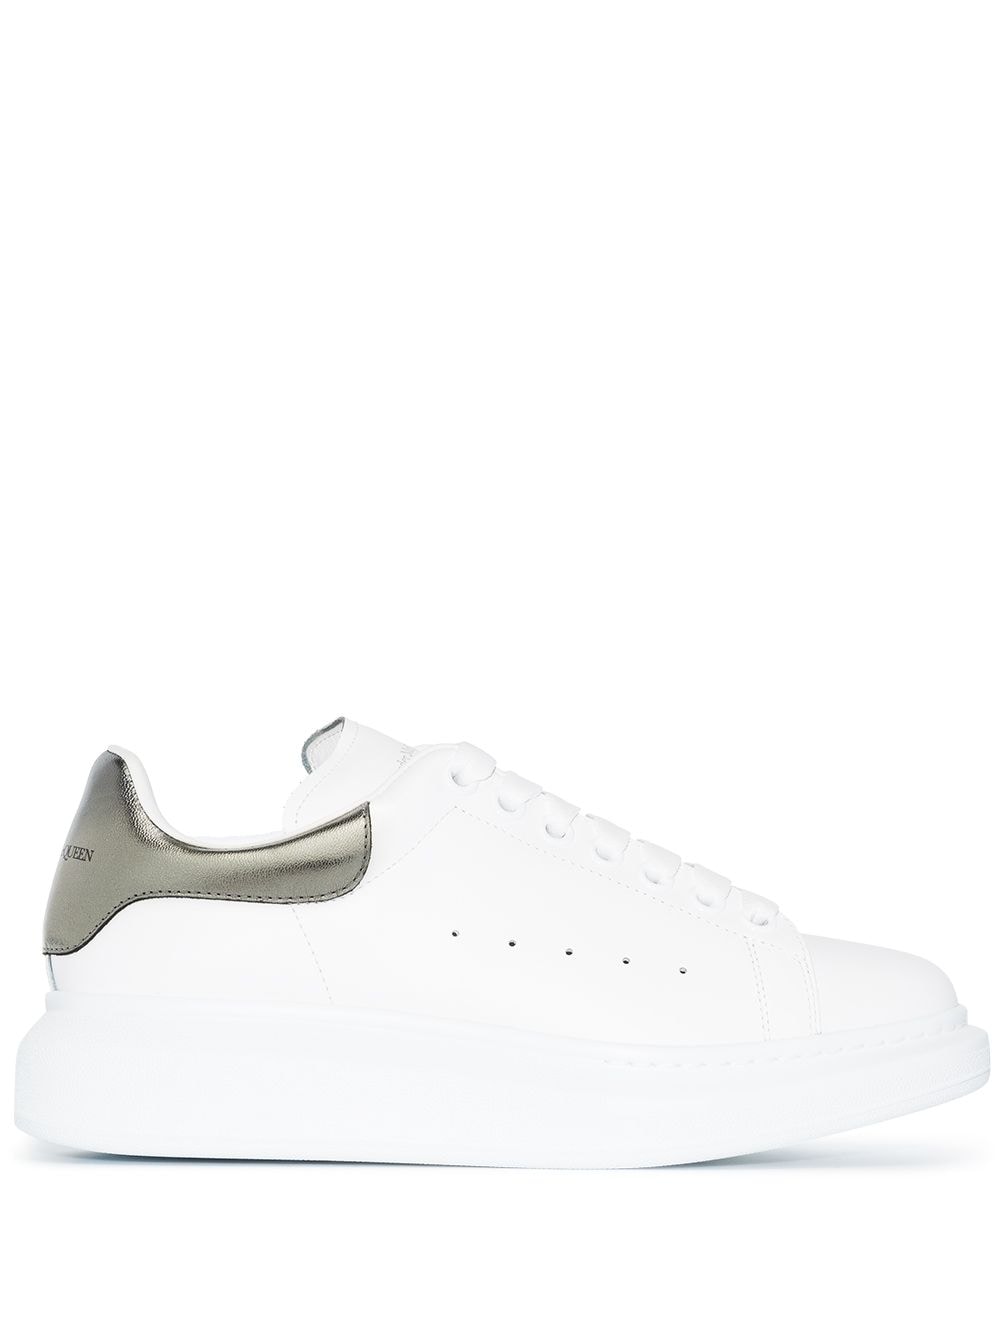 White/silver leather/suede oversized low-top sneakers